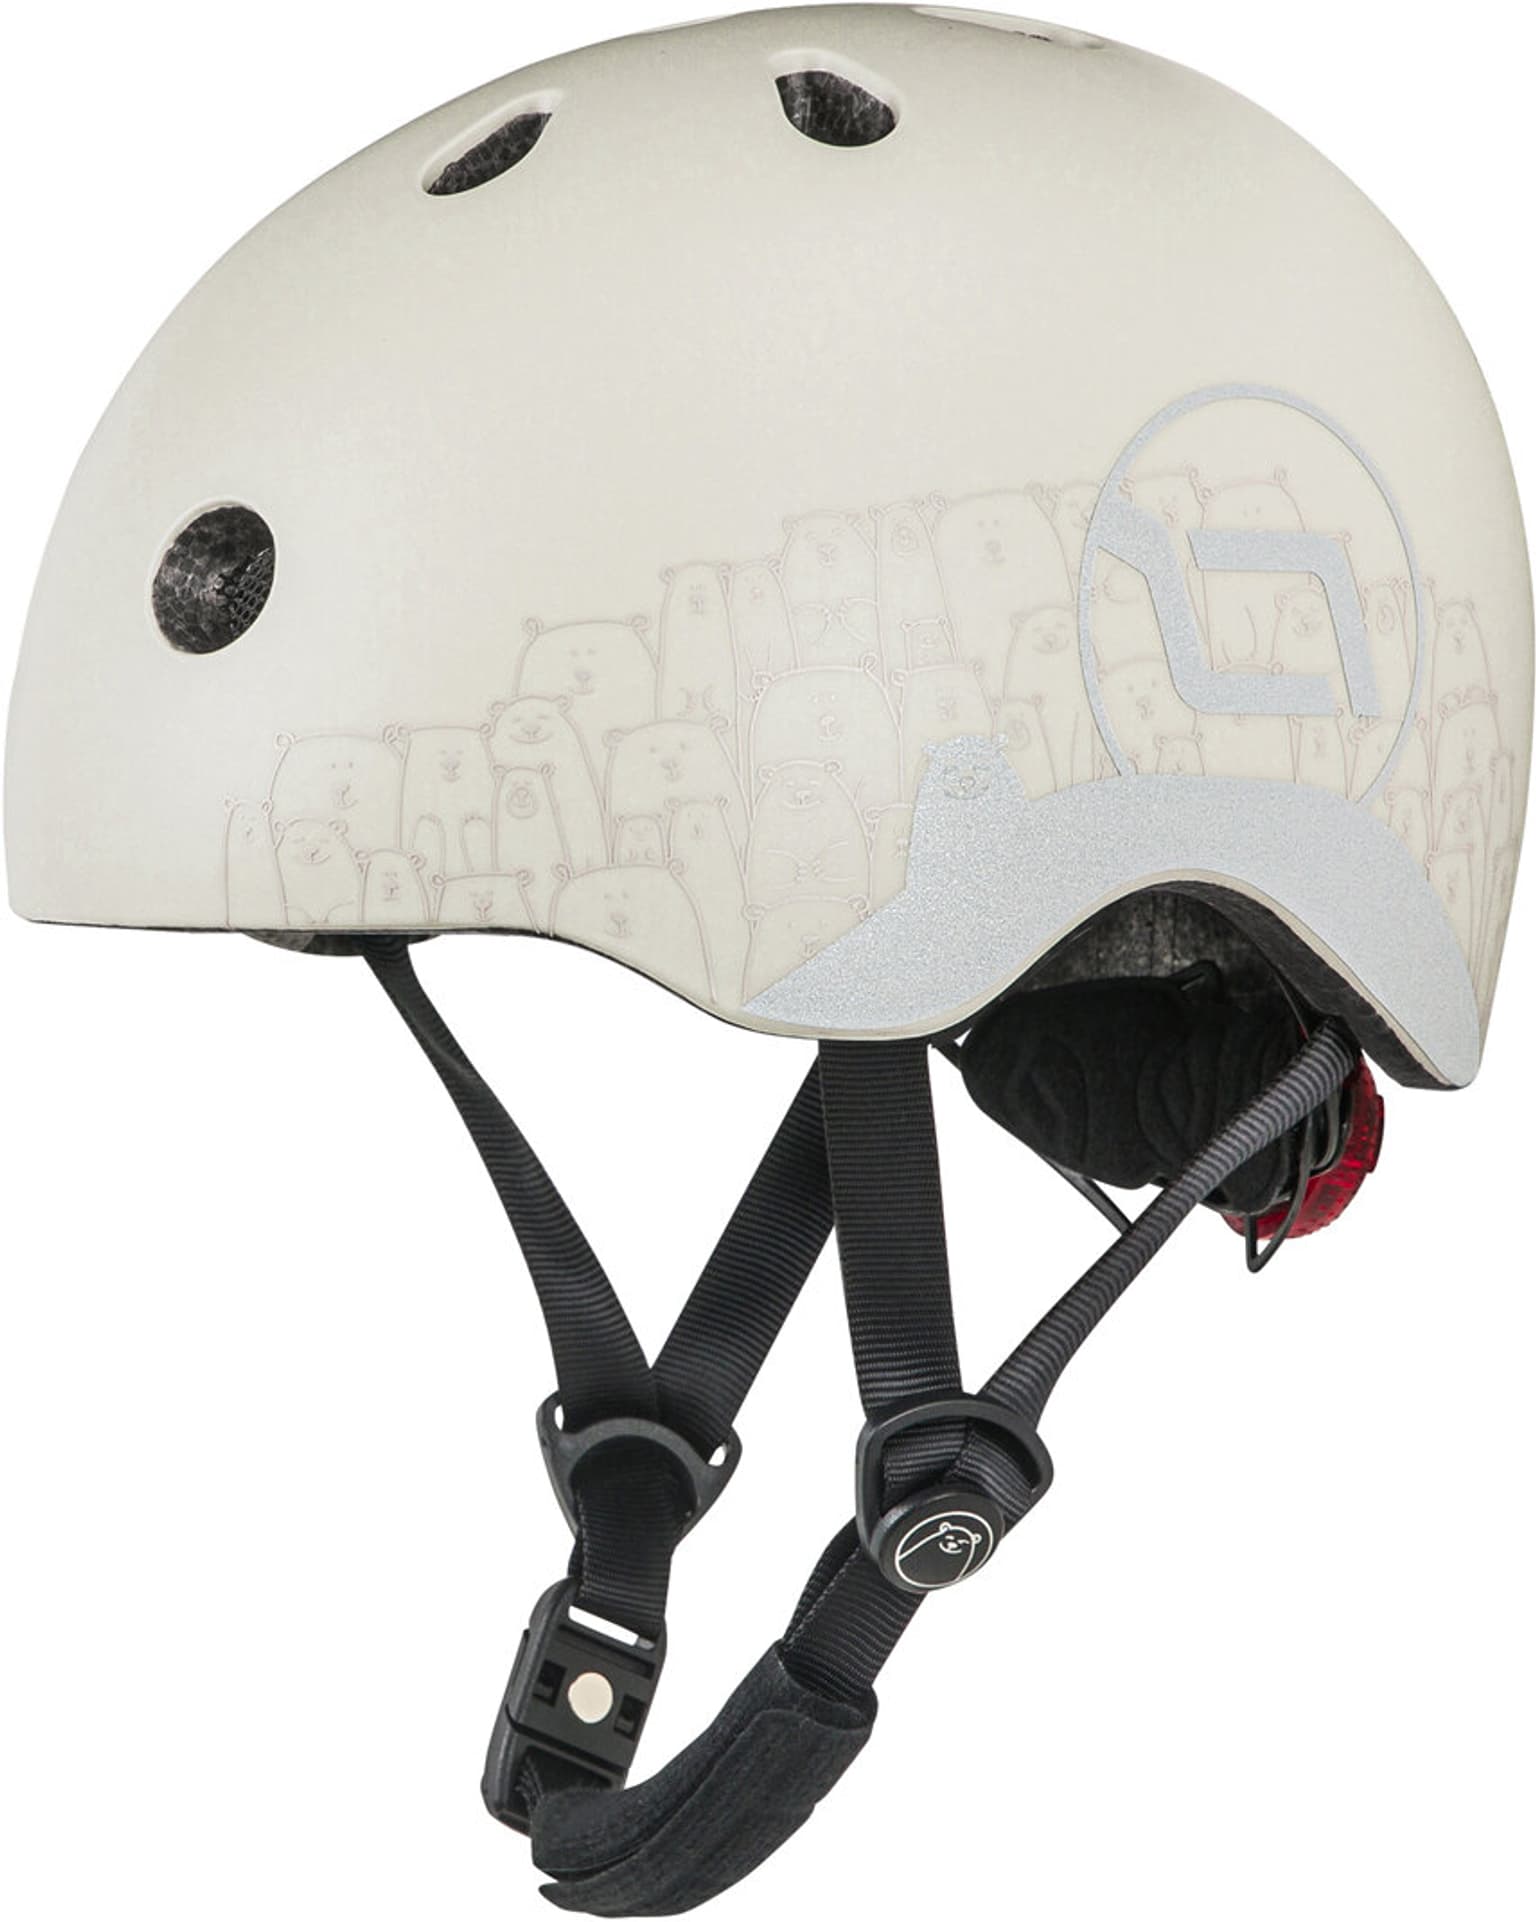 Scoot and Ride Scoot and Ride Reflective Ash Casque de patinage lut 1